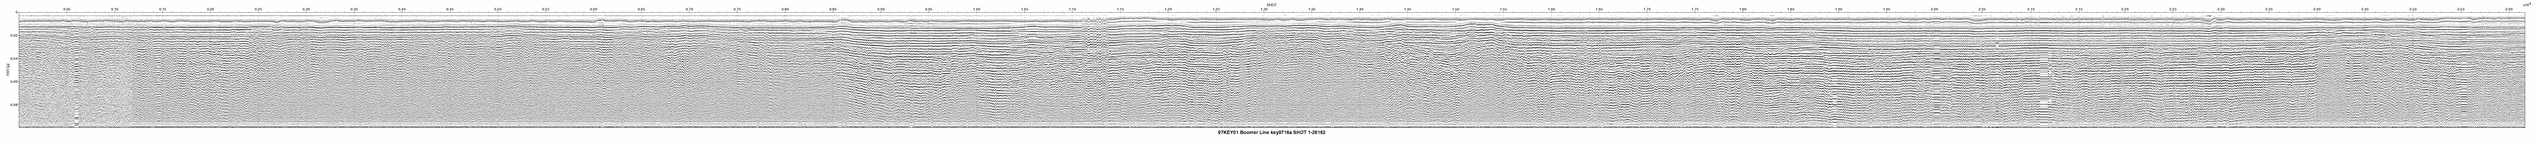 Thumbnail GIF image of the seismic trackline key9716a, with a hotlink to the more detailed, larger JPG image.